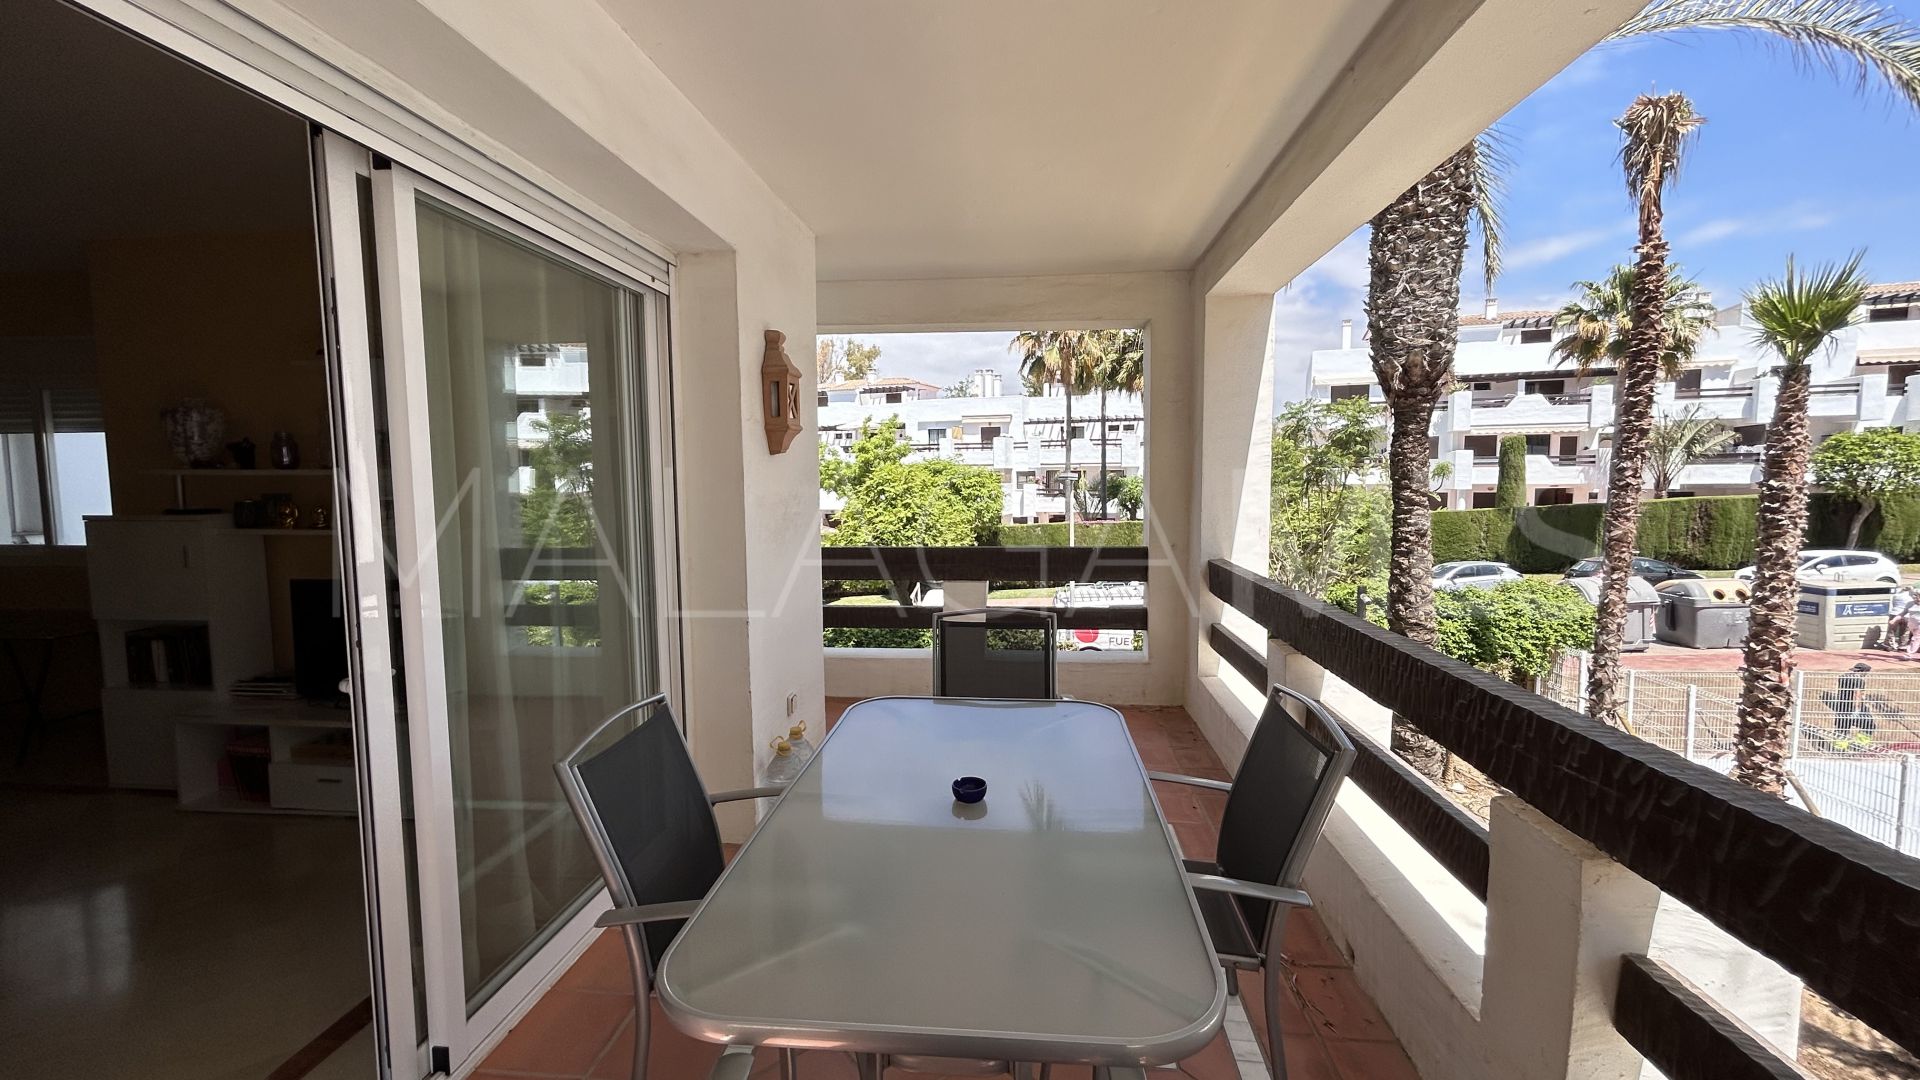 Costalita 3 bedrooms apartment for sale